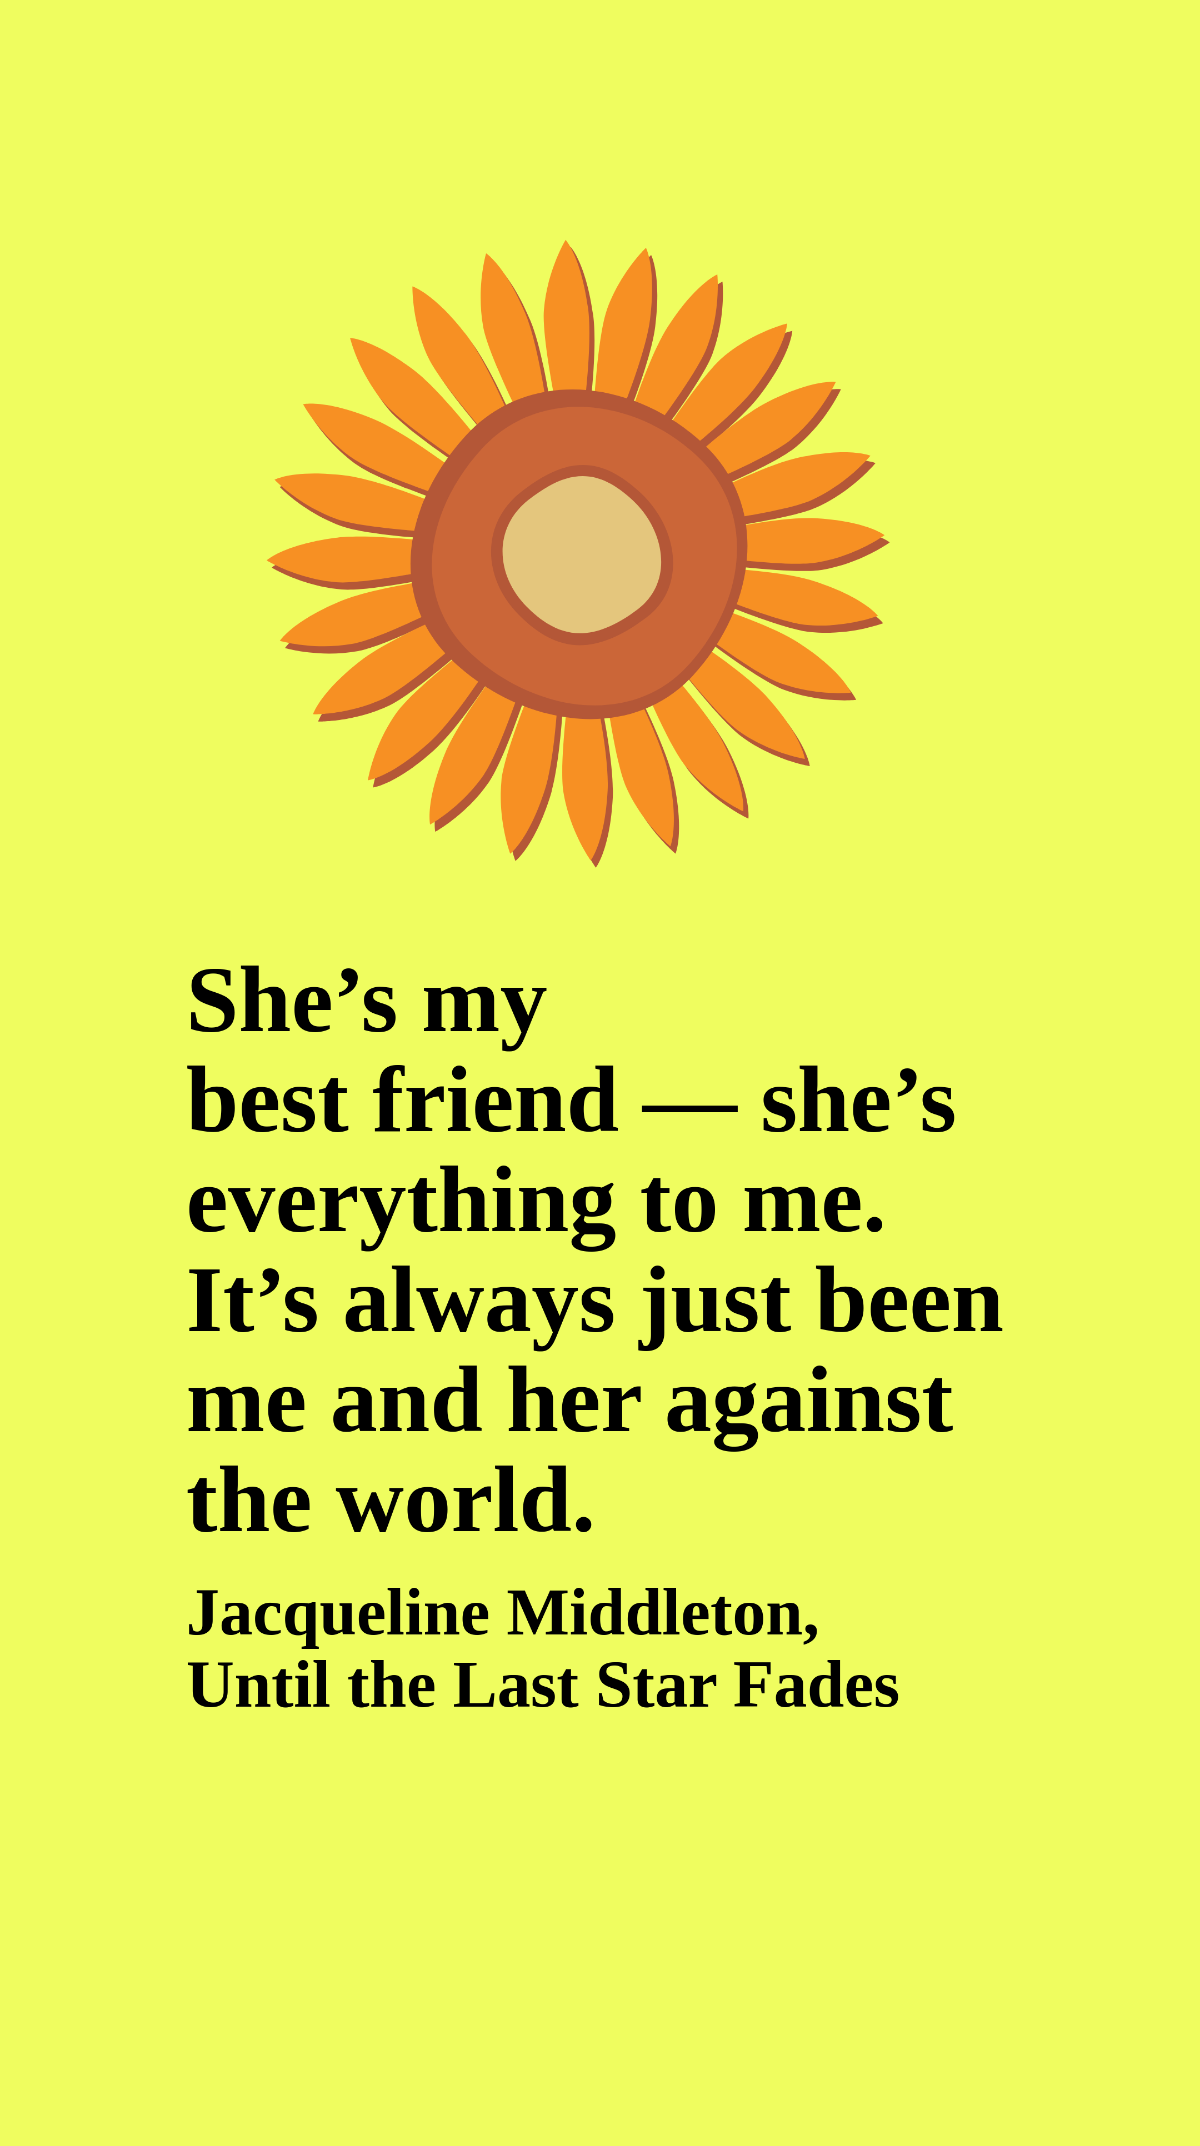 Jacqueline Middleton, Until the Last Star Fades - She’s my best friend — she’s everything to me. It’s always just been me and her against the world.